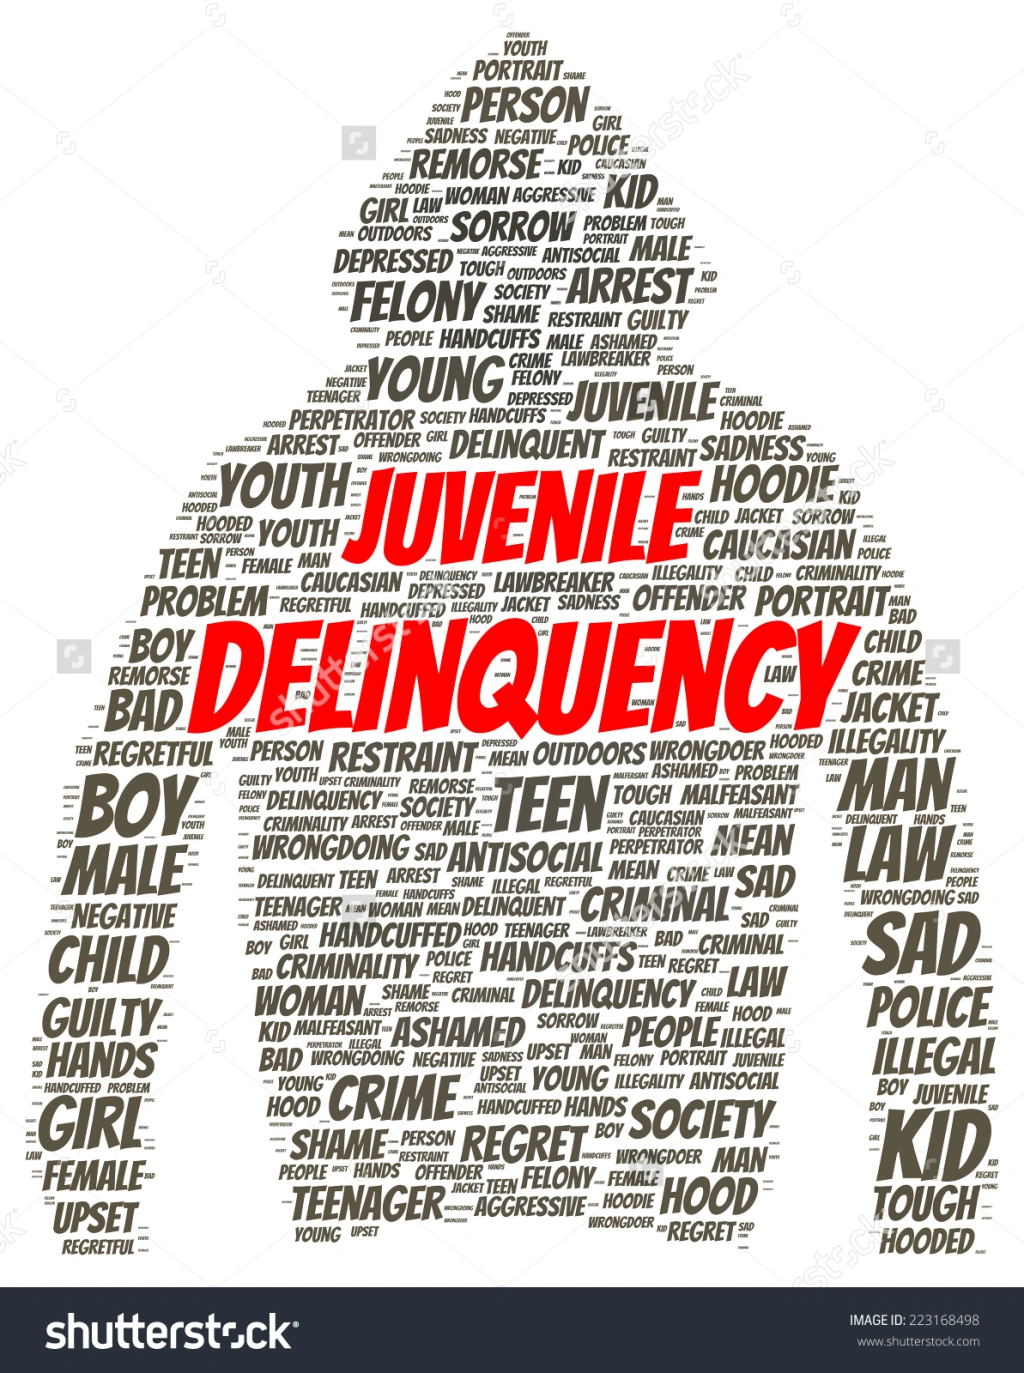 Literature review on juvenile delinquency